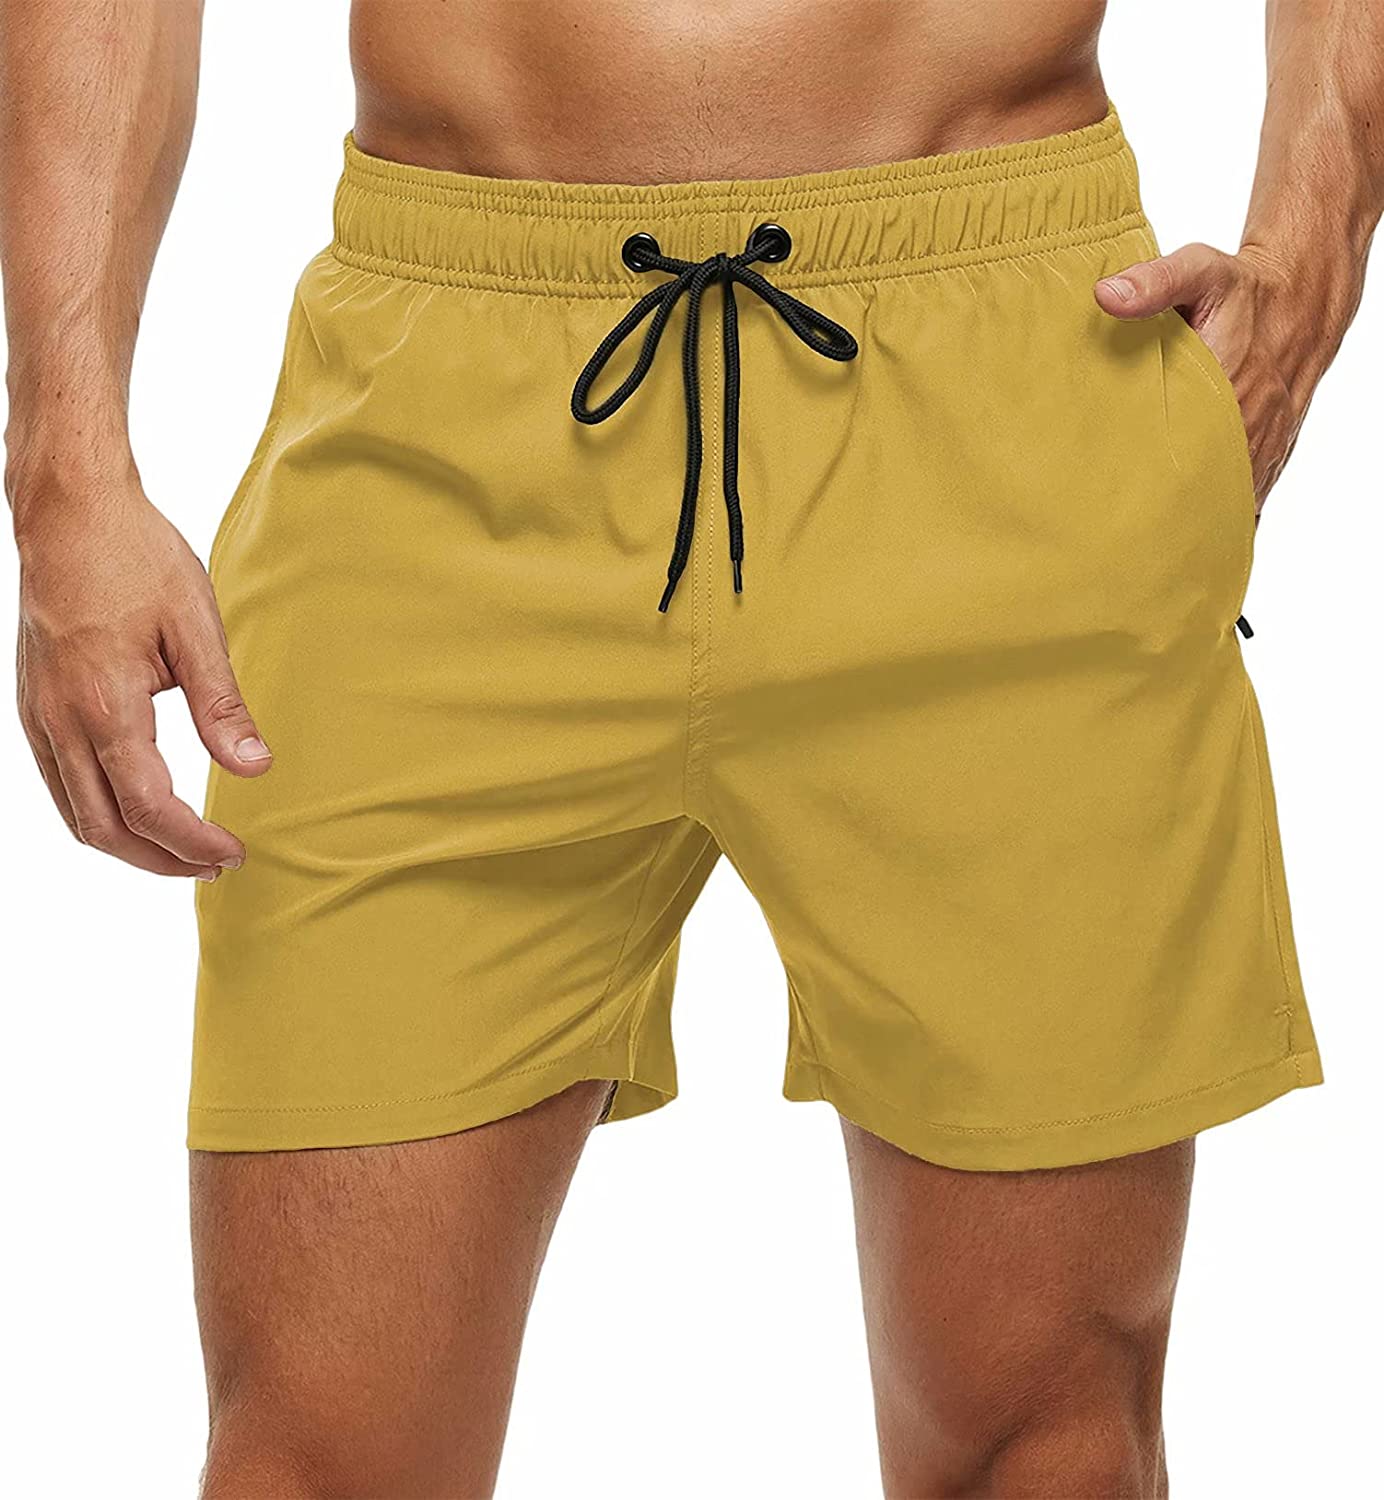 Men's Swim Trunks Quick Dry Beach Shorts with Zipper Pockets and